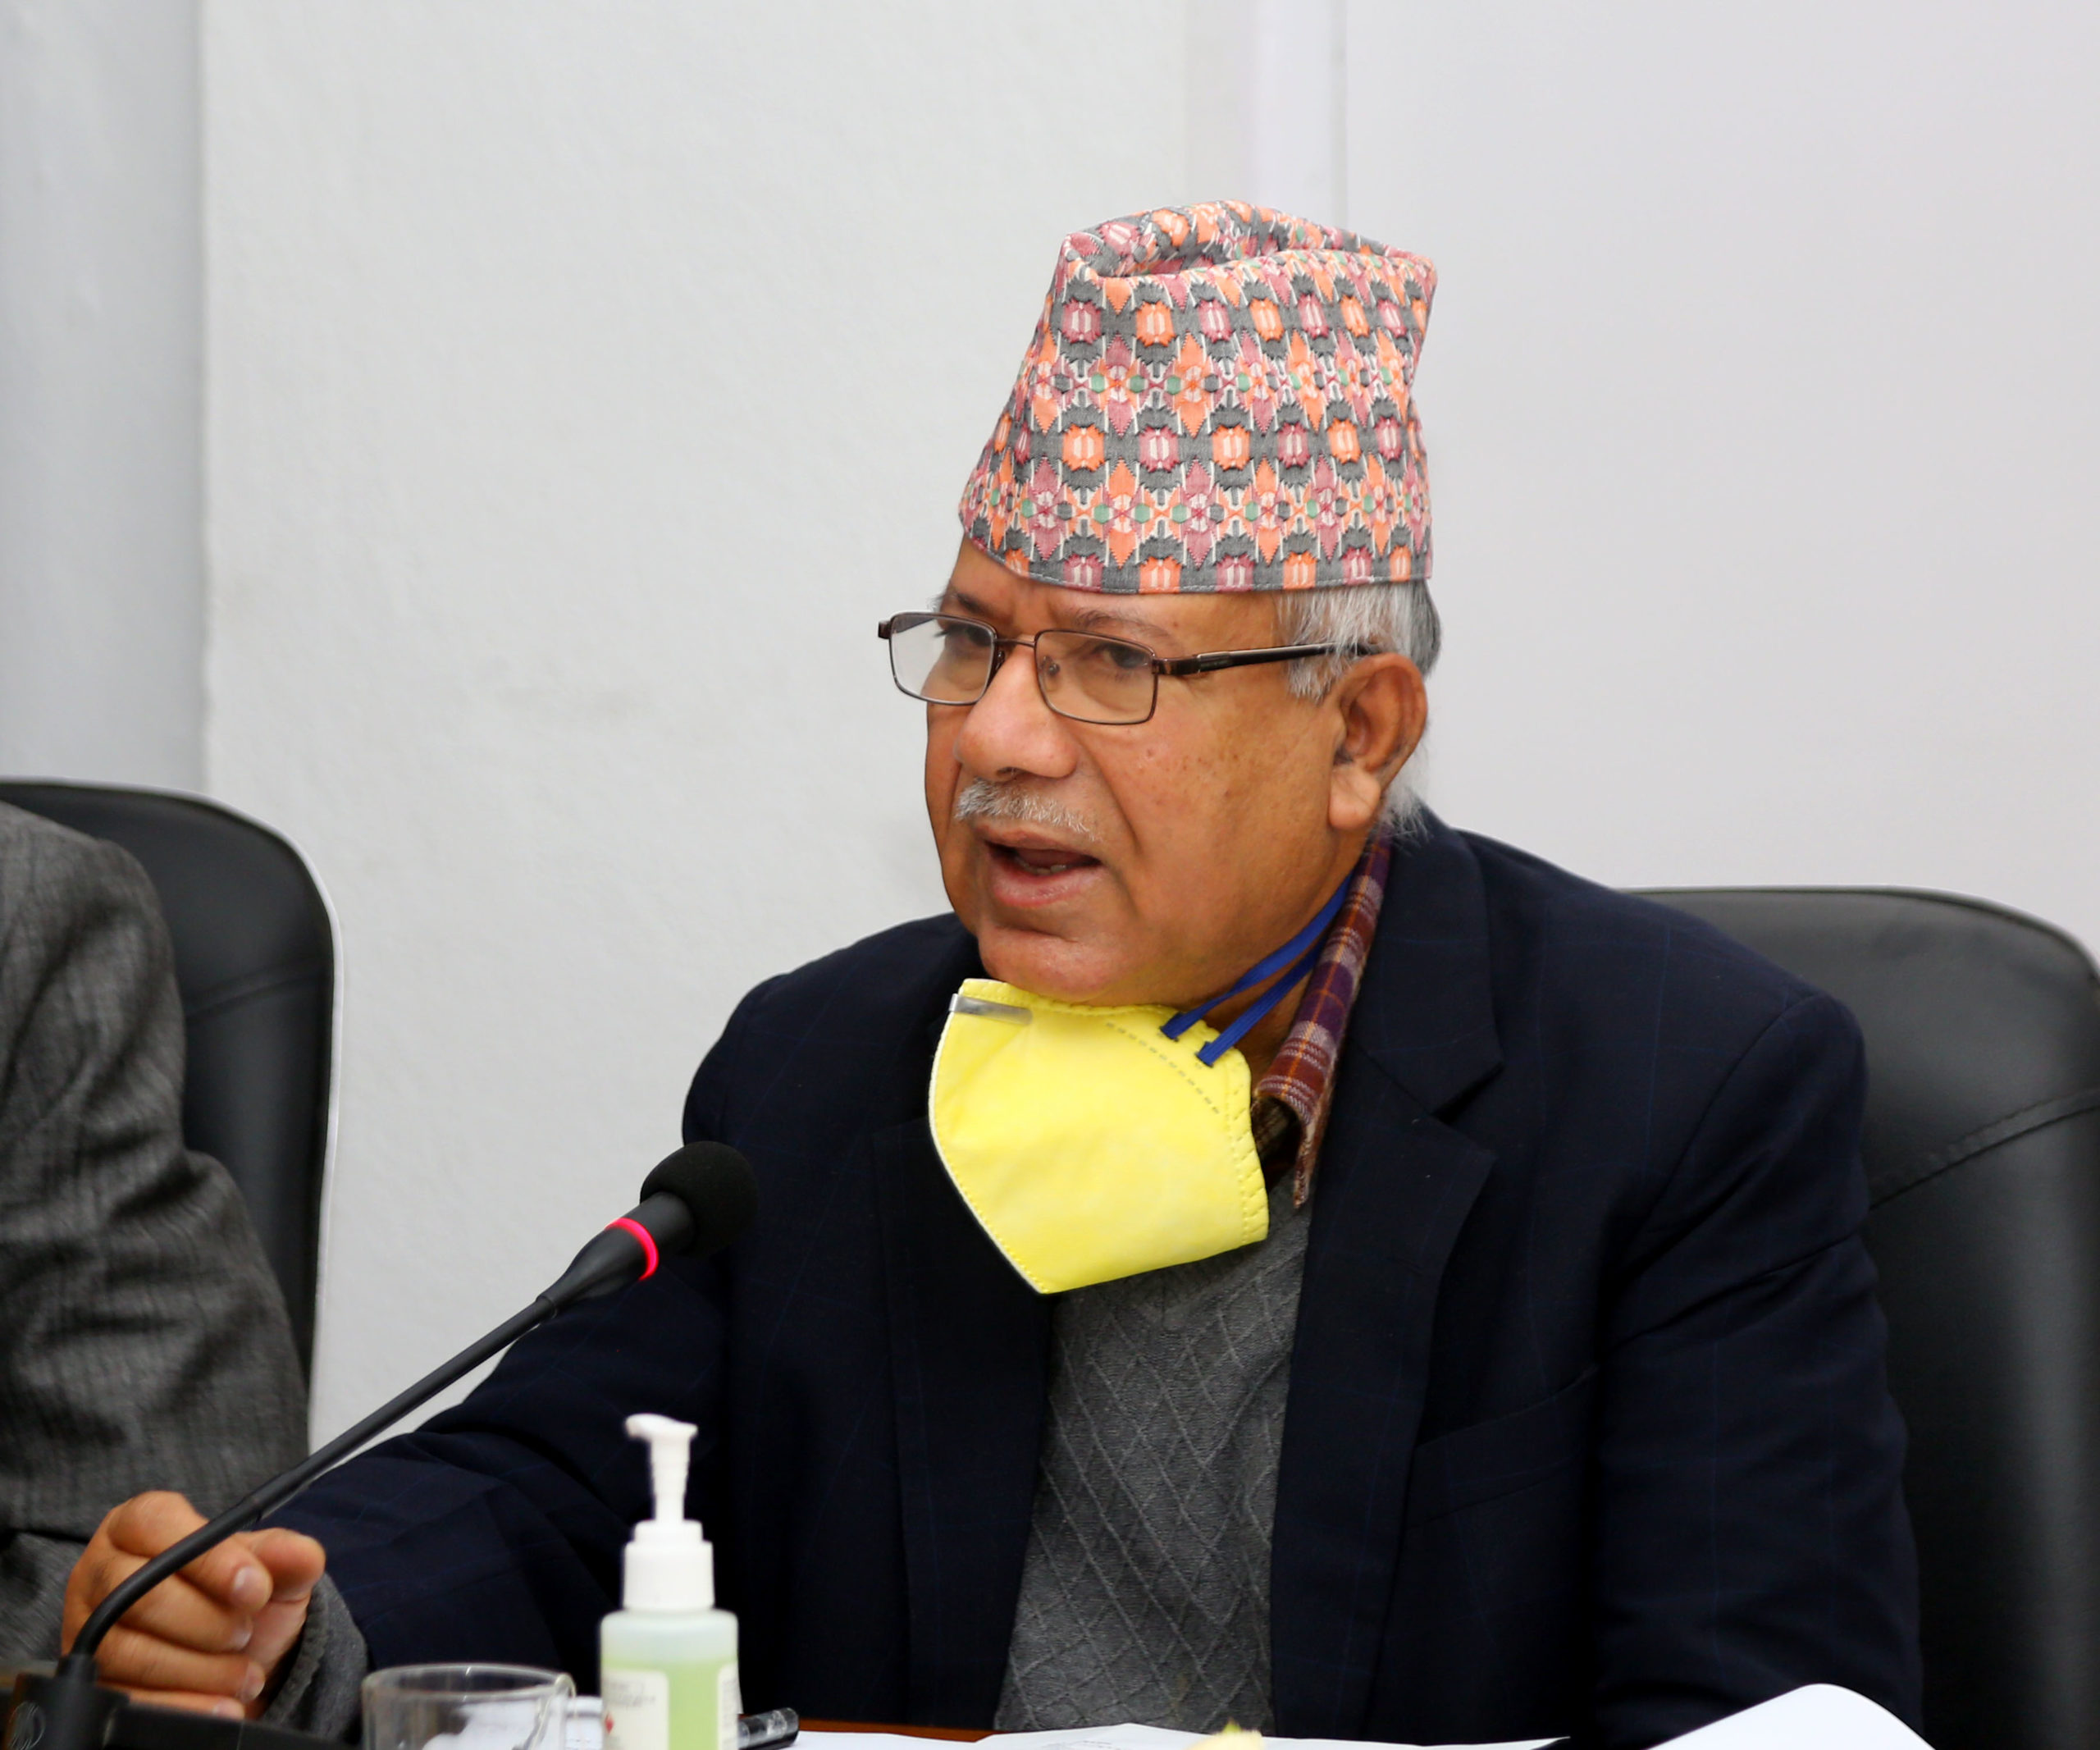 Difference with neighbors should be settled via dialogue: Leader Nepal